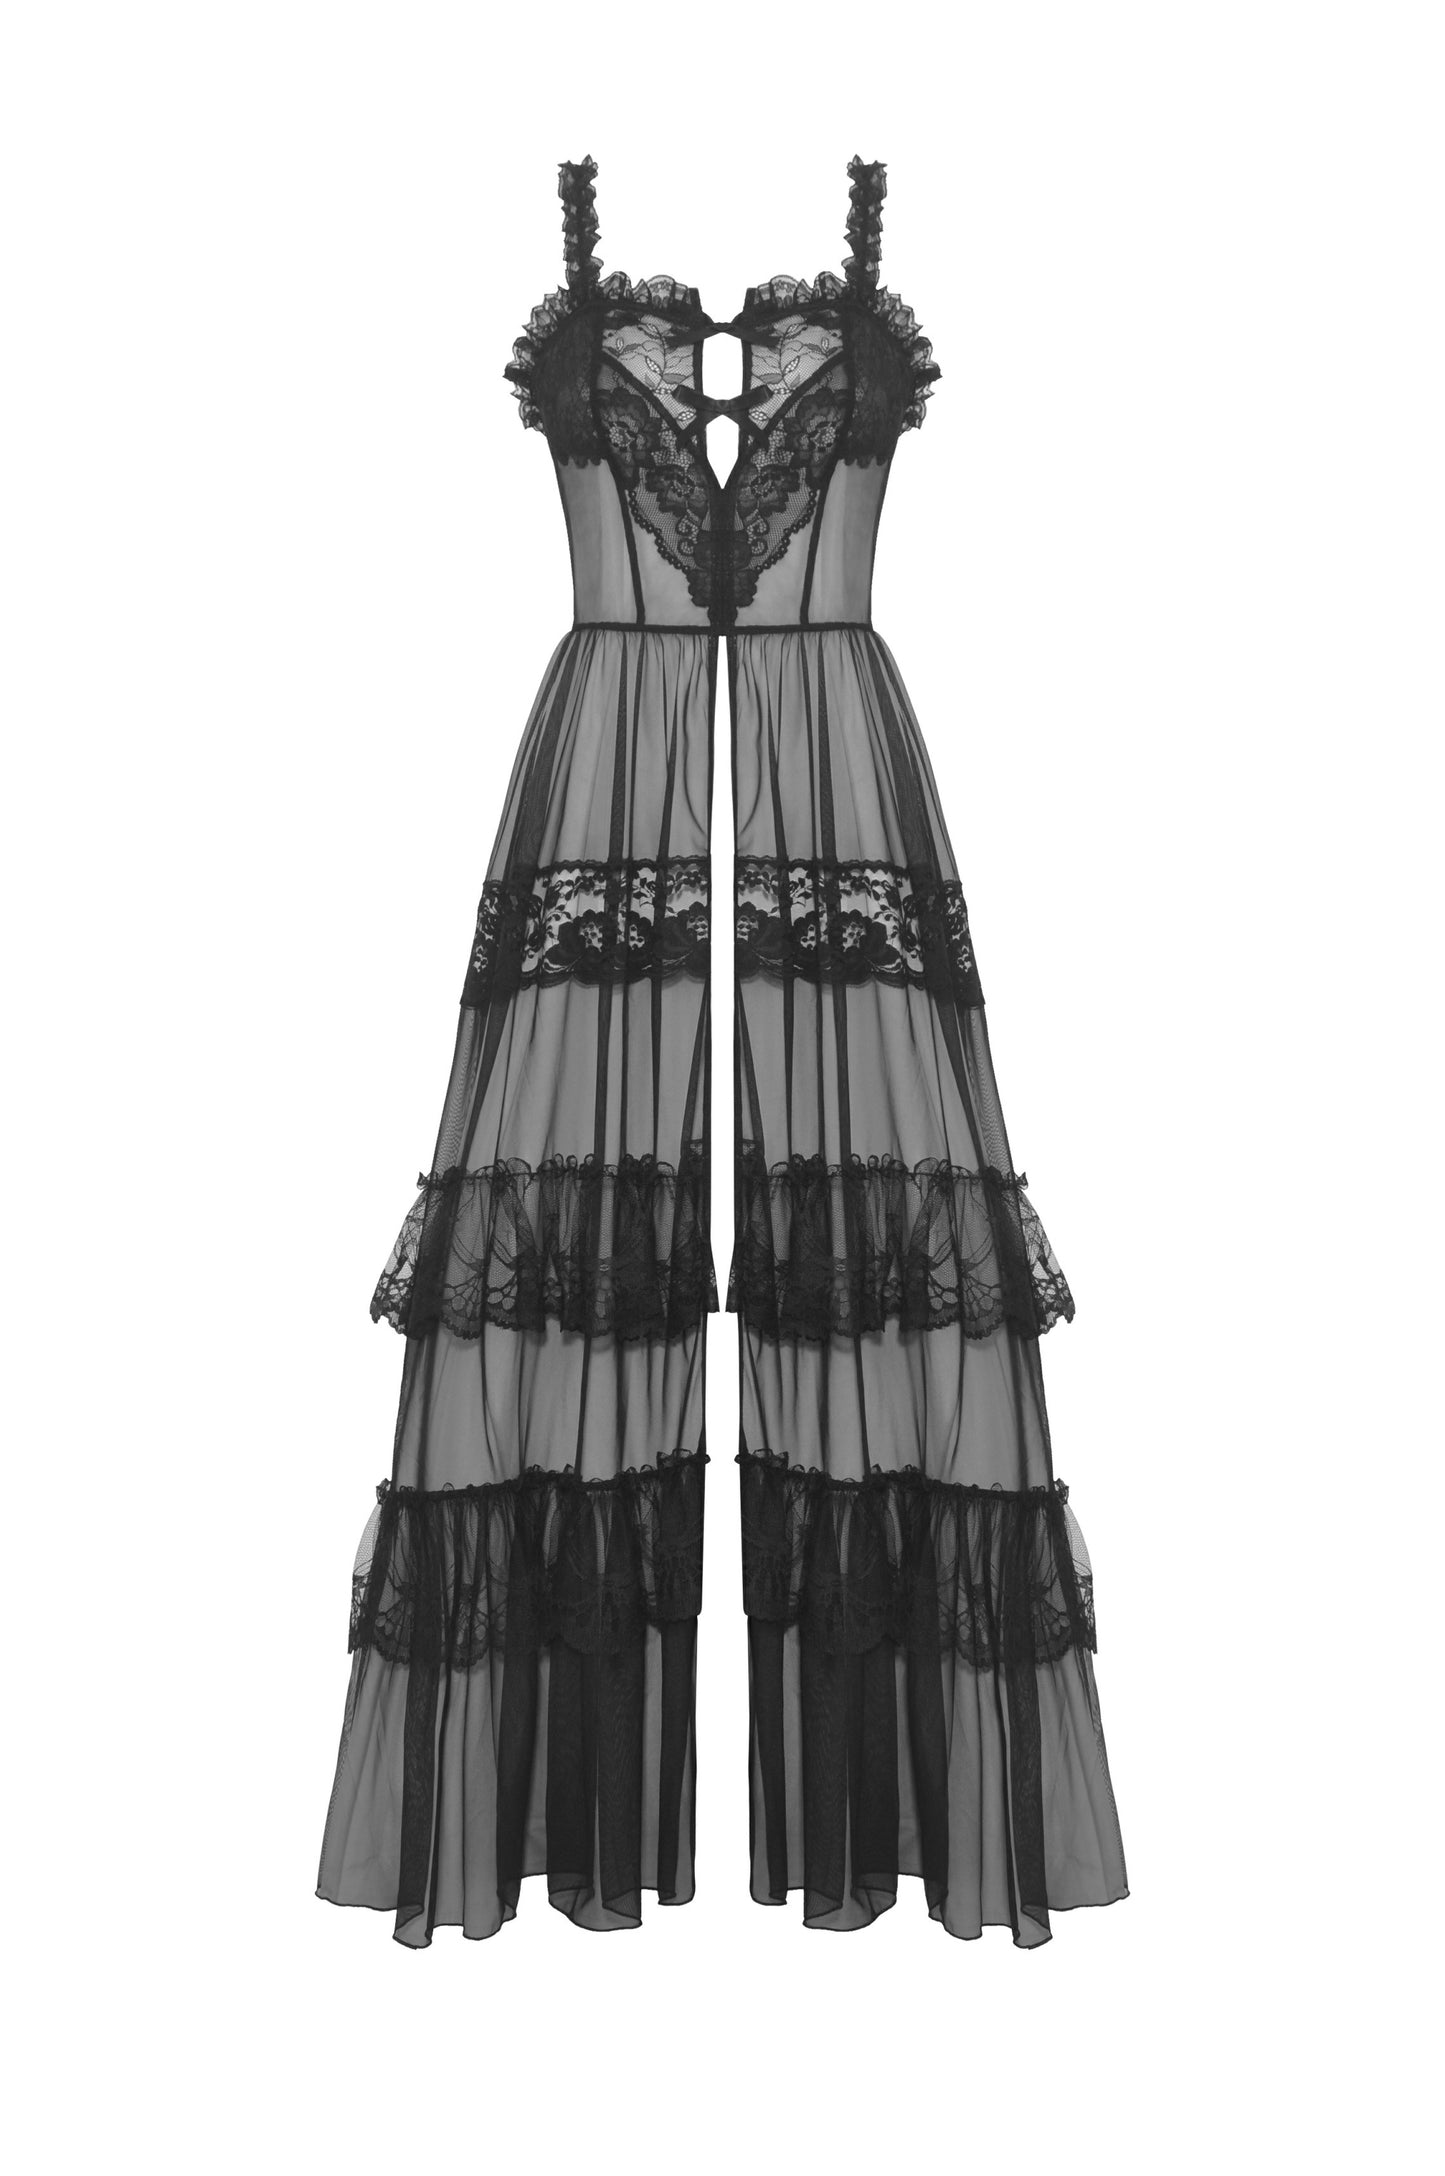 Gothic Lovesick Lace Heart Mesh Dress by Dark In Love